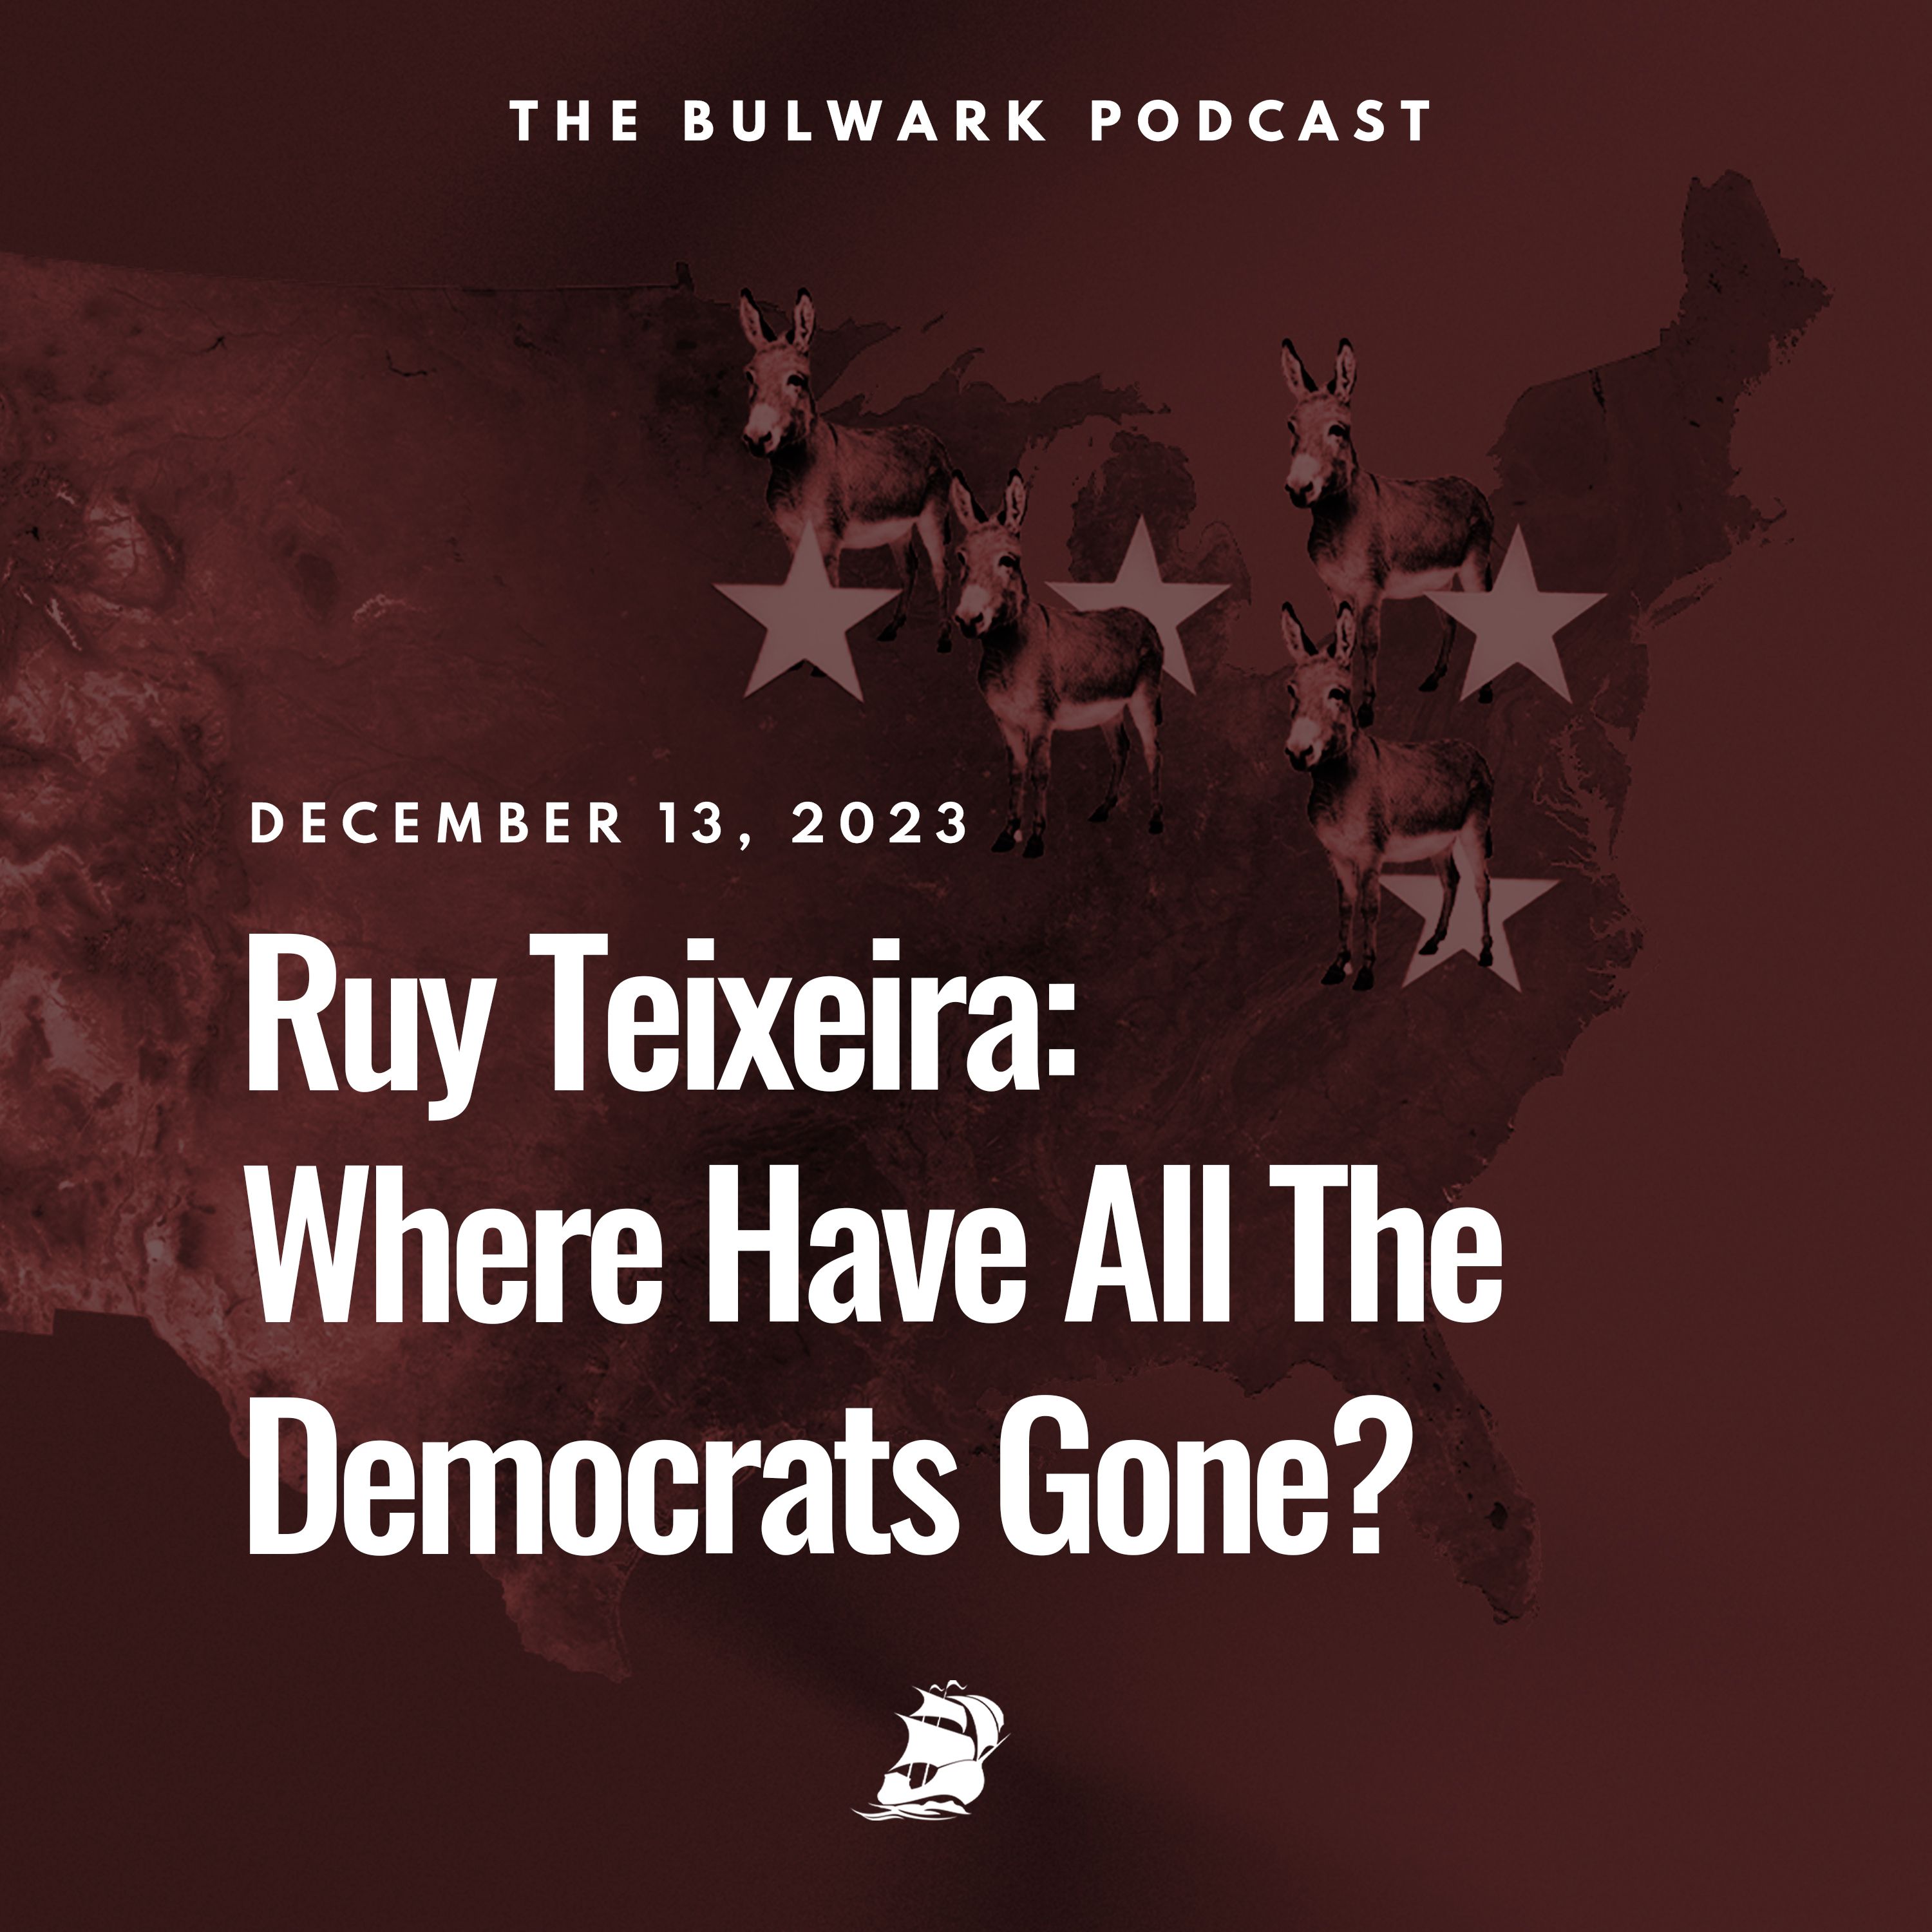 Where Have All the Democrats Gone? by The Bulwark Podcast